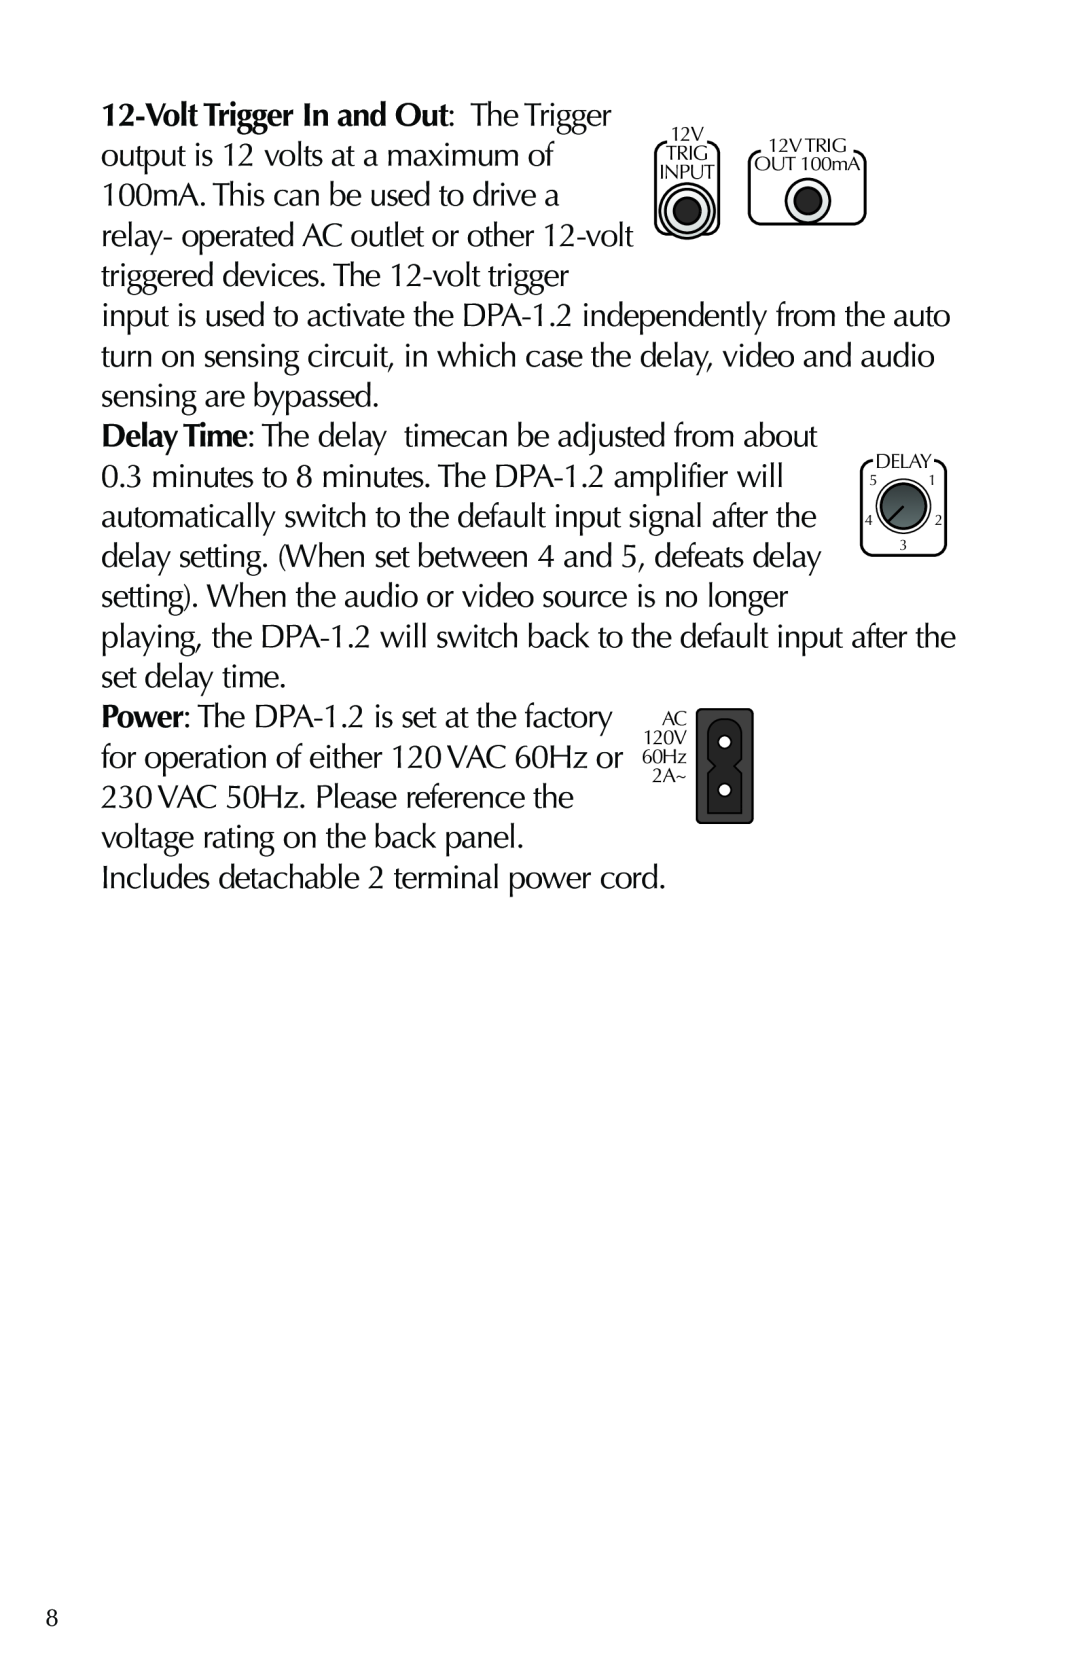 Russound DPA-1.2 instruction manual triggered devices. The 12-volttrigger 